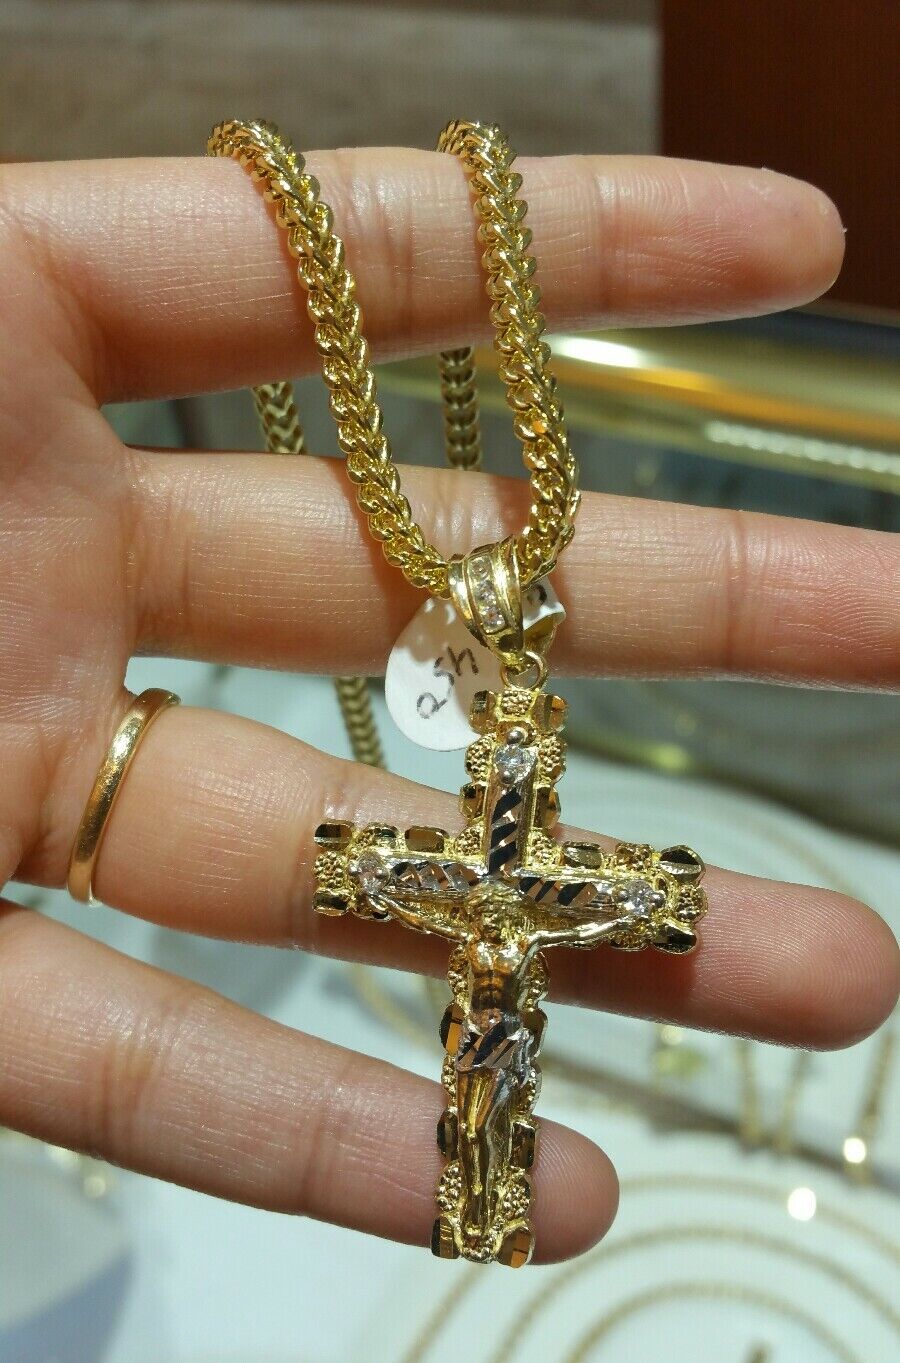 Real 10k Yellow Gold Mens Jesus Cross Charm/Pendant  with 22" franco chain